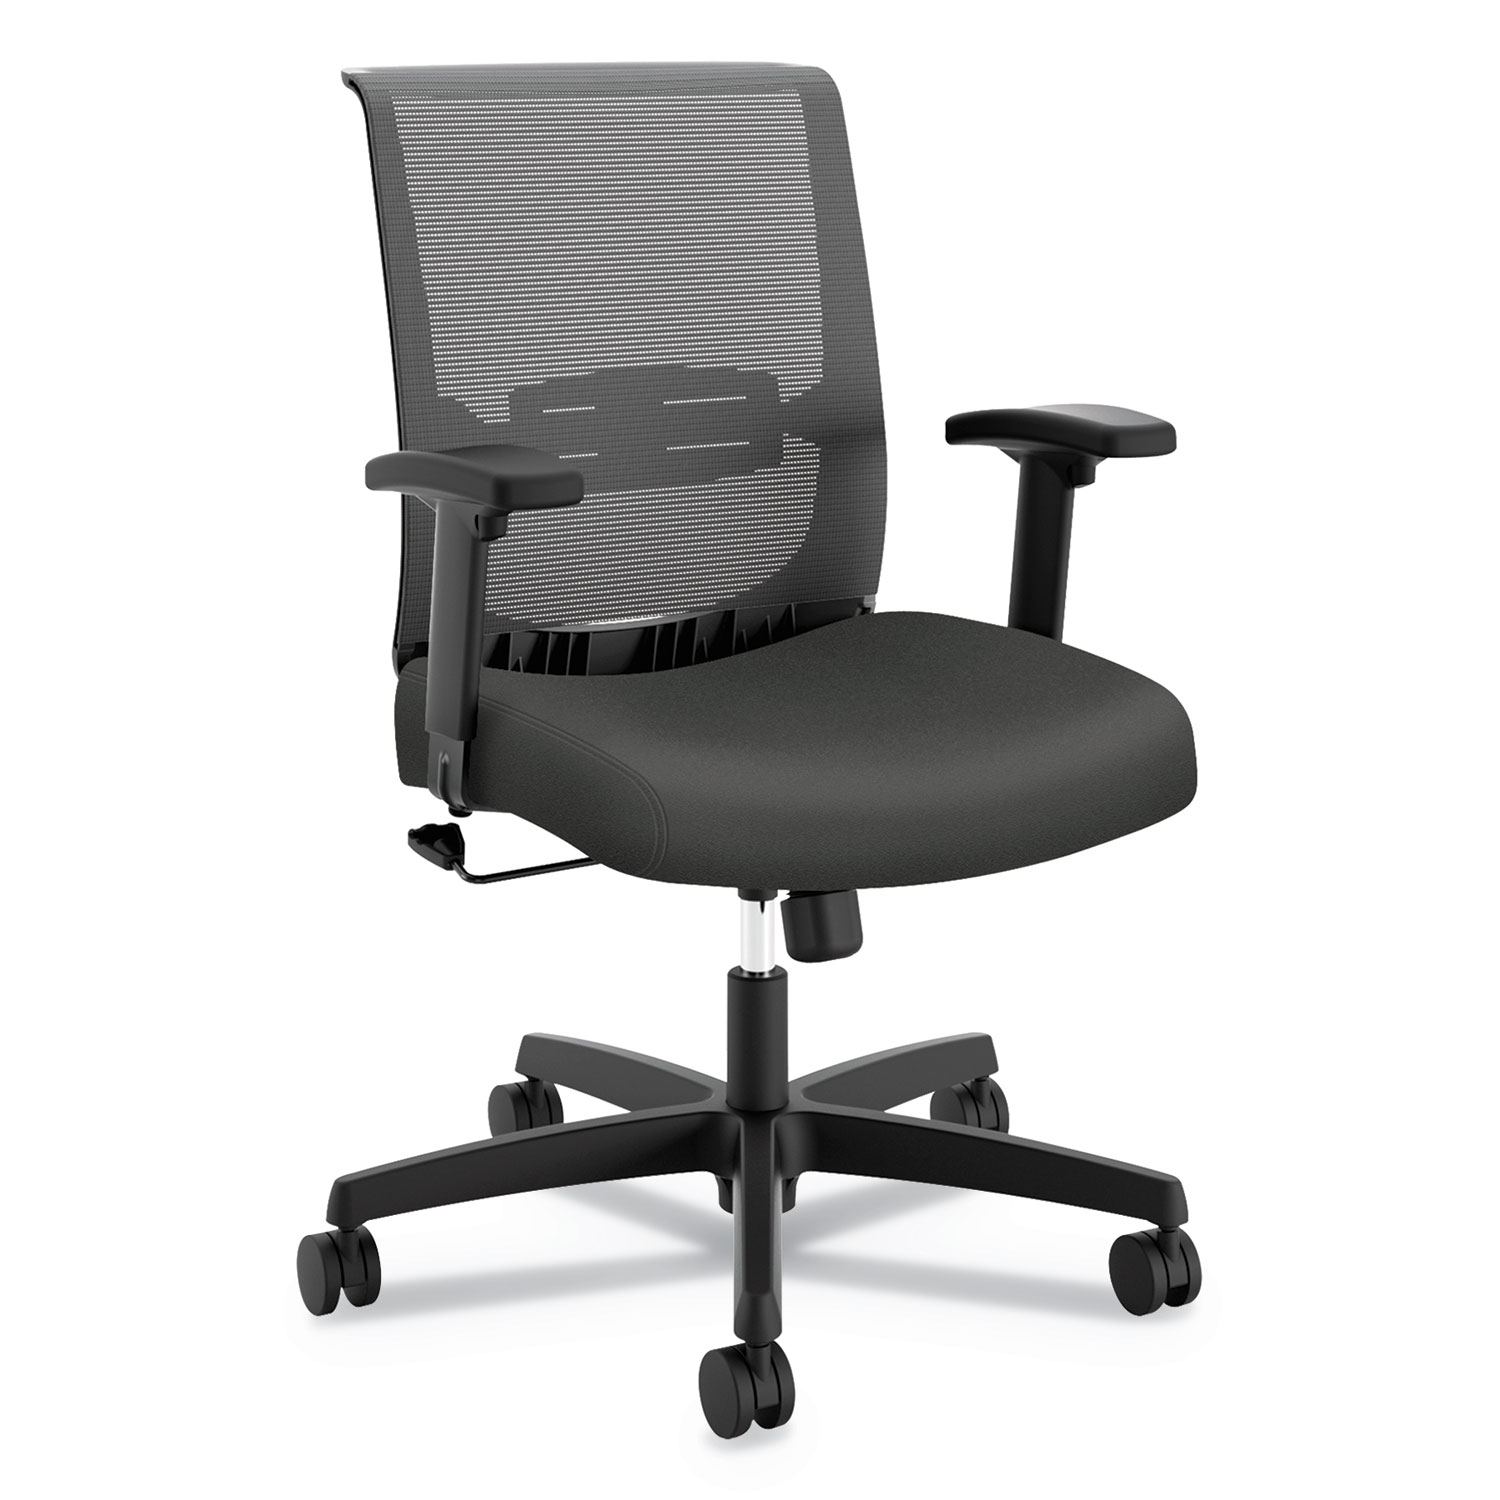  HON HONCMZ1ACU19 Convergence Mid-Back Task Chair with Swivel-Tilt Control, Supports up to 275 lbs, Iron Ore Seat, Black Back, Black Base (HONCMZ1ACU19) 